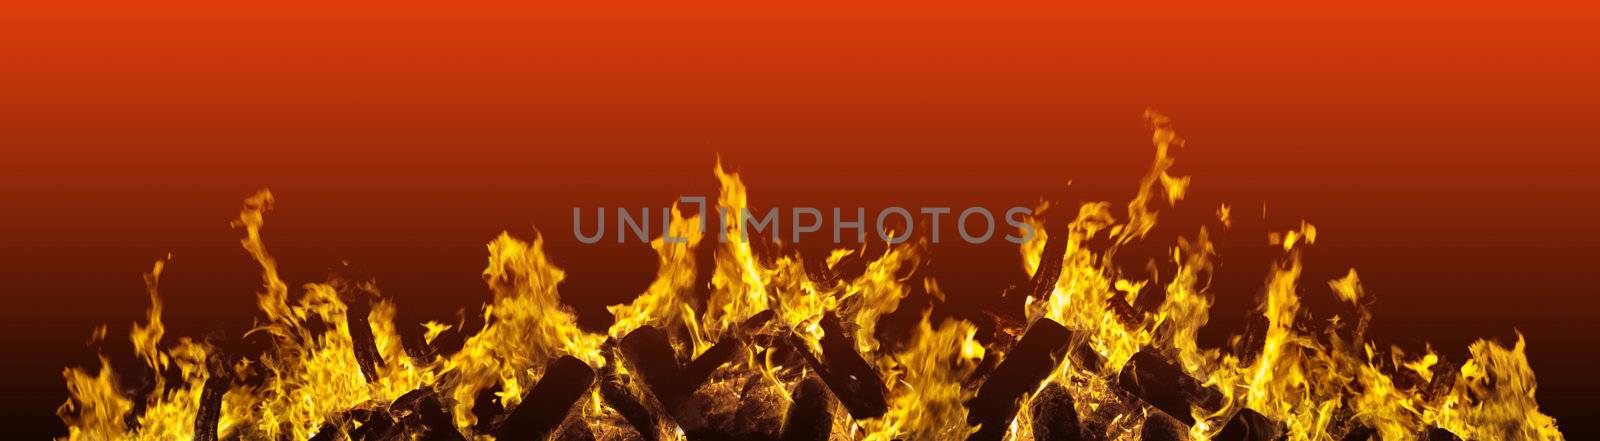  blazing flames fire border with fiery red background abstract arrangement 